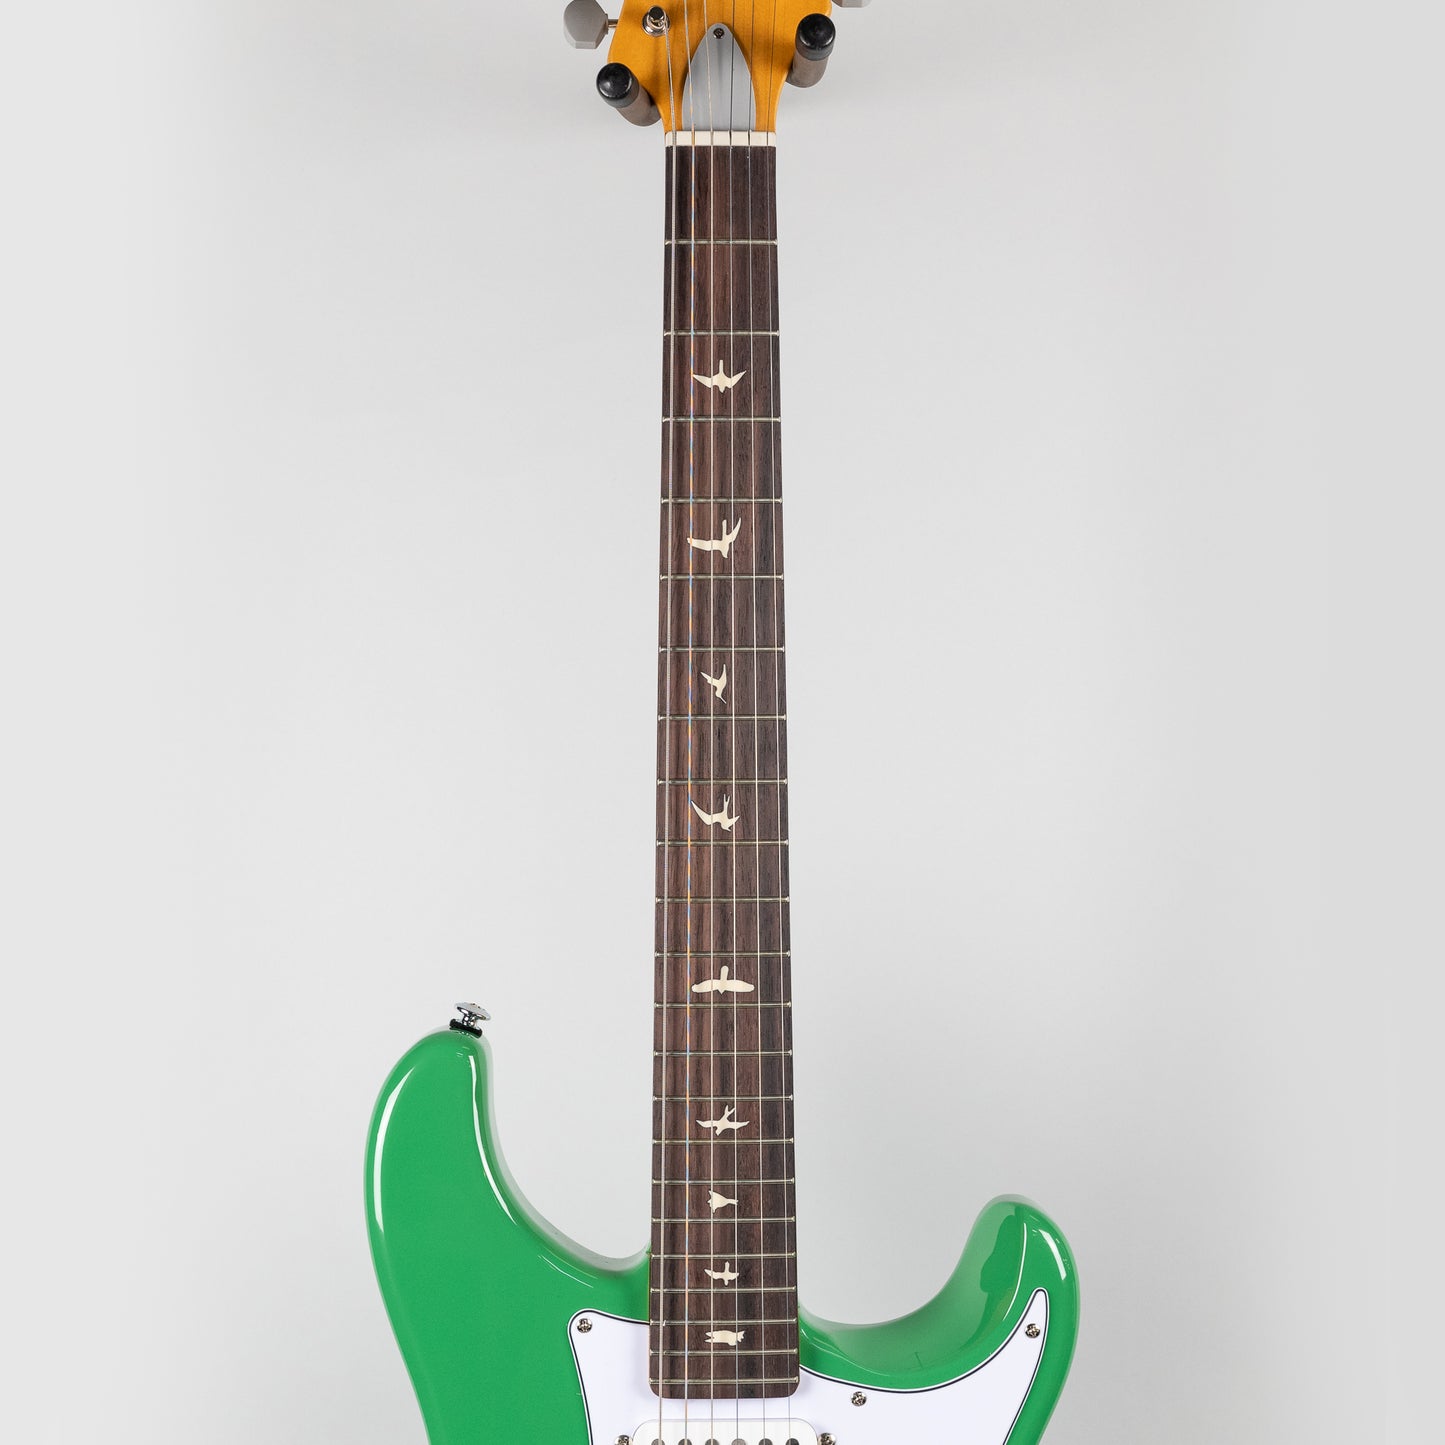 Paul Reed Smith SE Silver Sky in Ever Green